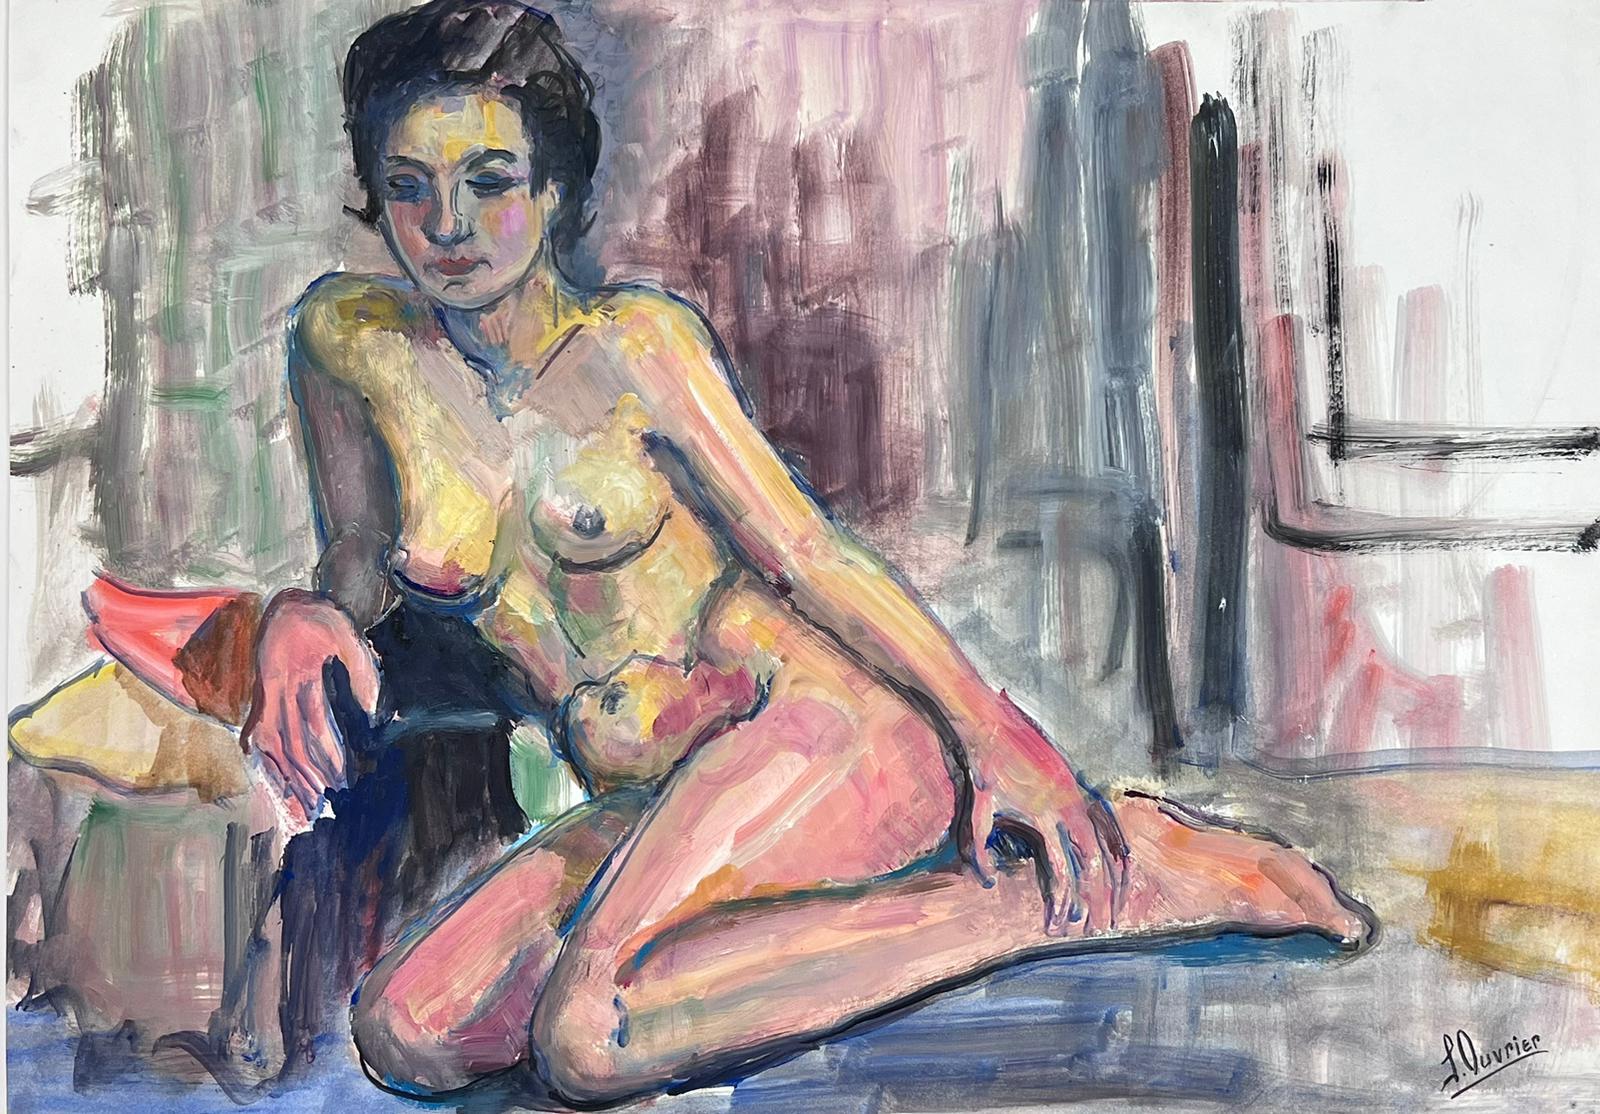 The Artists Model
Nude Lady Model
French School, circa 1970's  
signed oil painting on card, unframed
size: 17.5 x 24.5 inches
condition: overall very good, a very few light markings to the surface but nothing detrimental to the appeal and